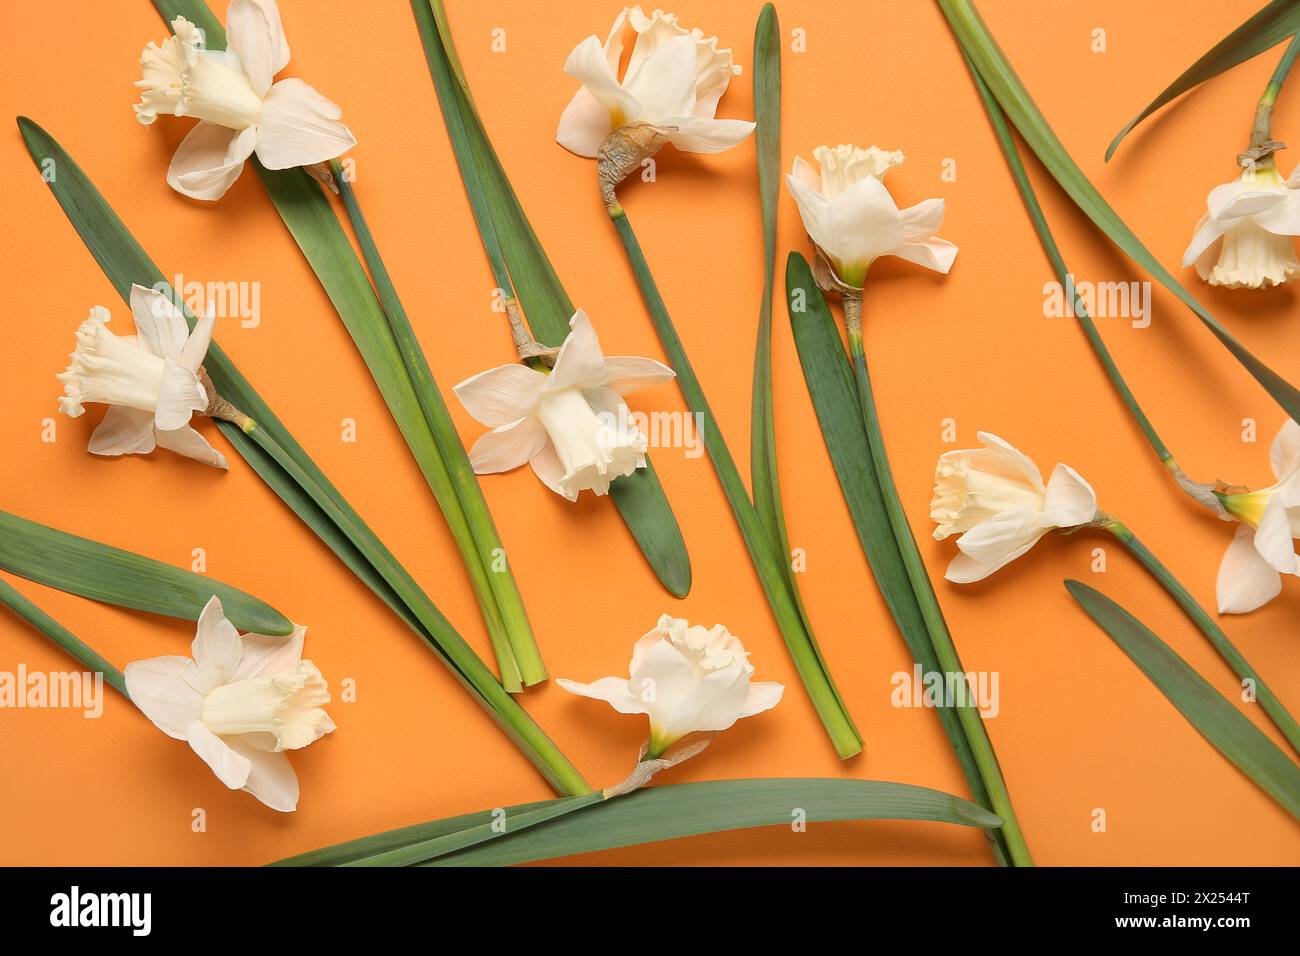 Composition with daffodil flowers on orange background. Top view Stock Photo